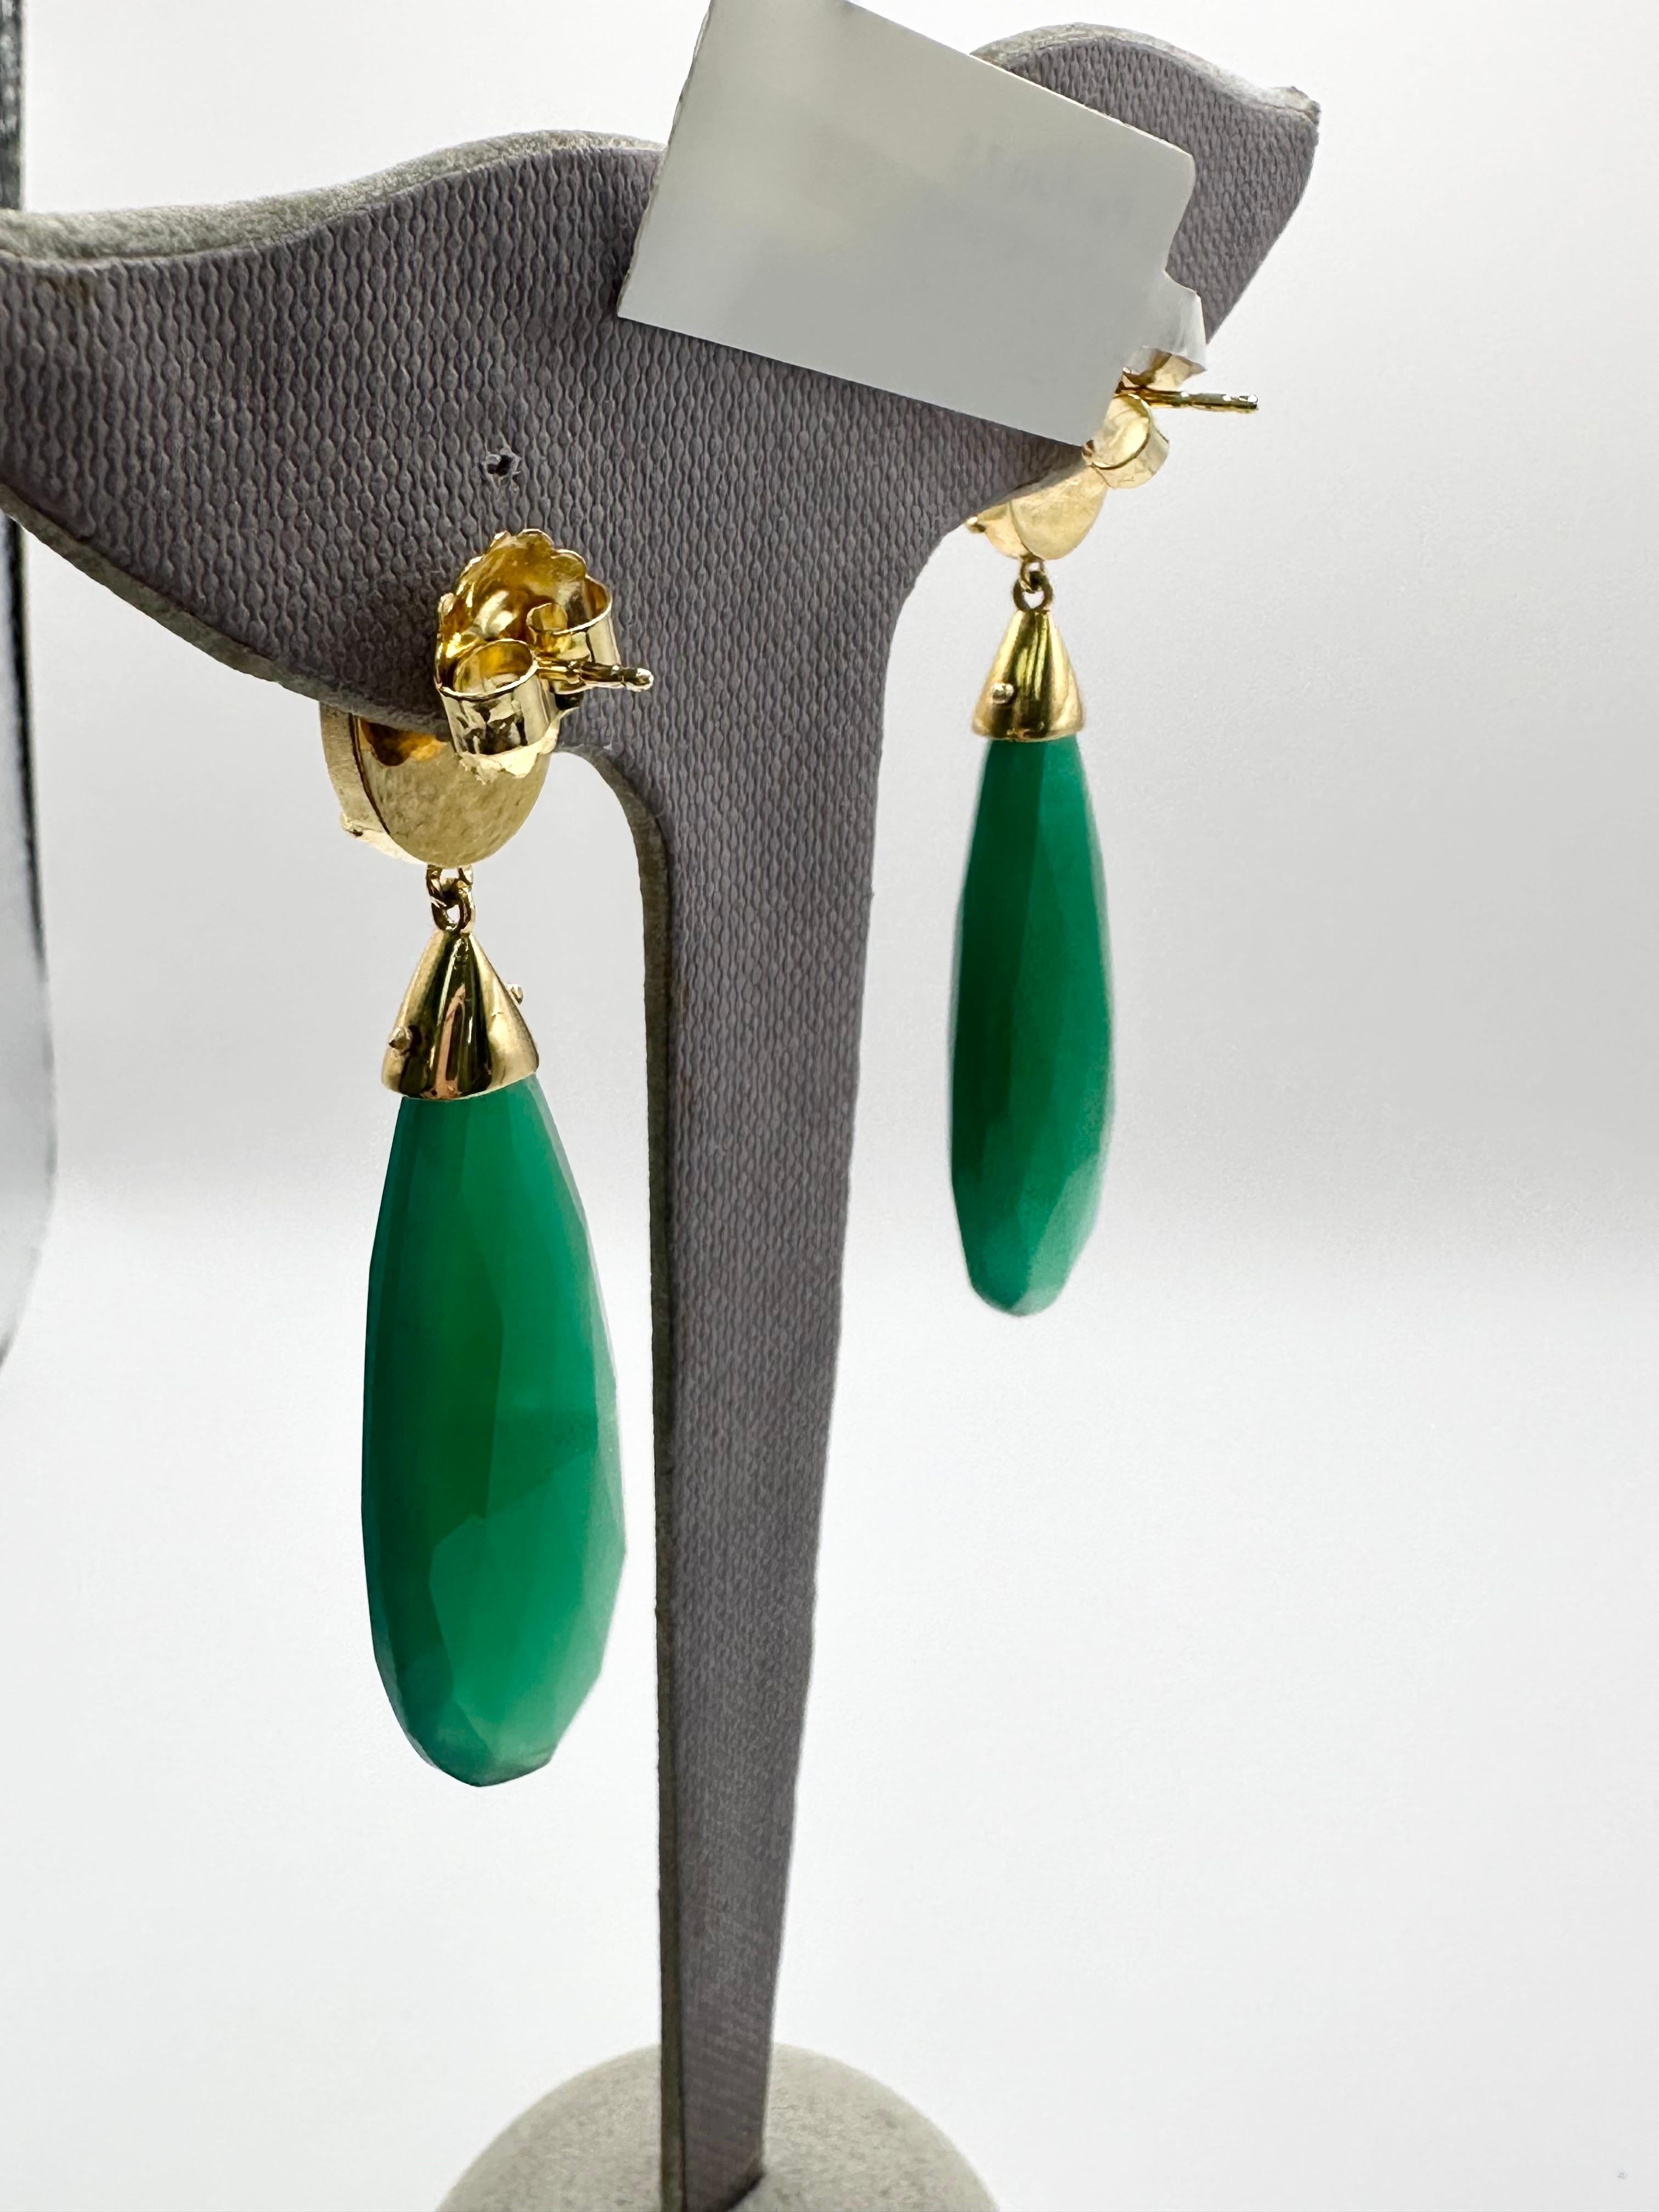 Beautiful summer earrings made with 18KT yellow gold, green aventurine and blue tourquise, such a rich gamma of colors that looks good on brunettes and blondes! These earrings are long please see pictures attached!

Certificate of authenticity comes